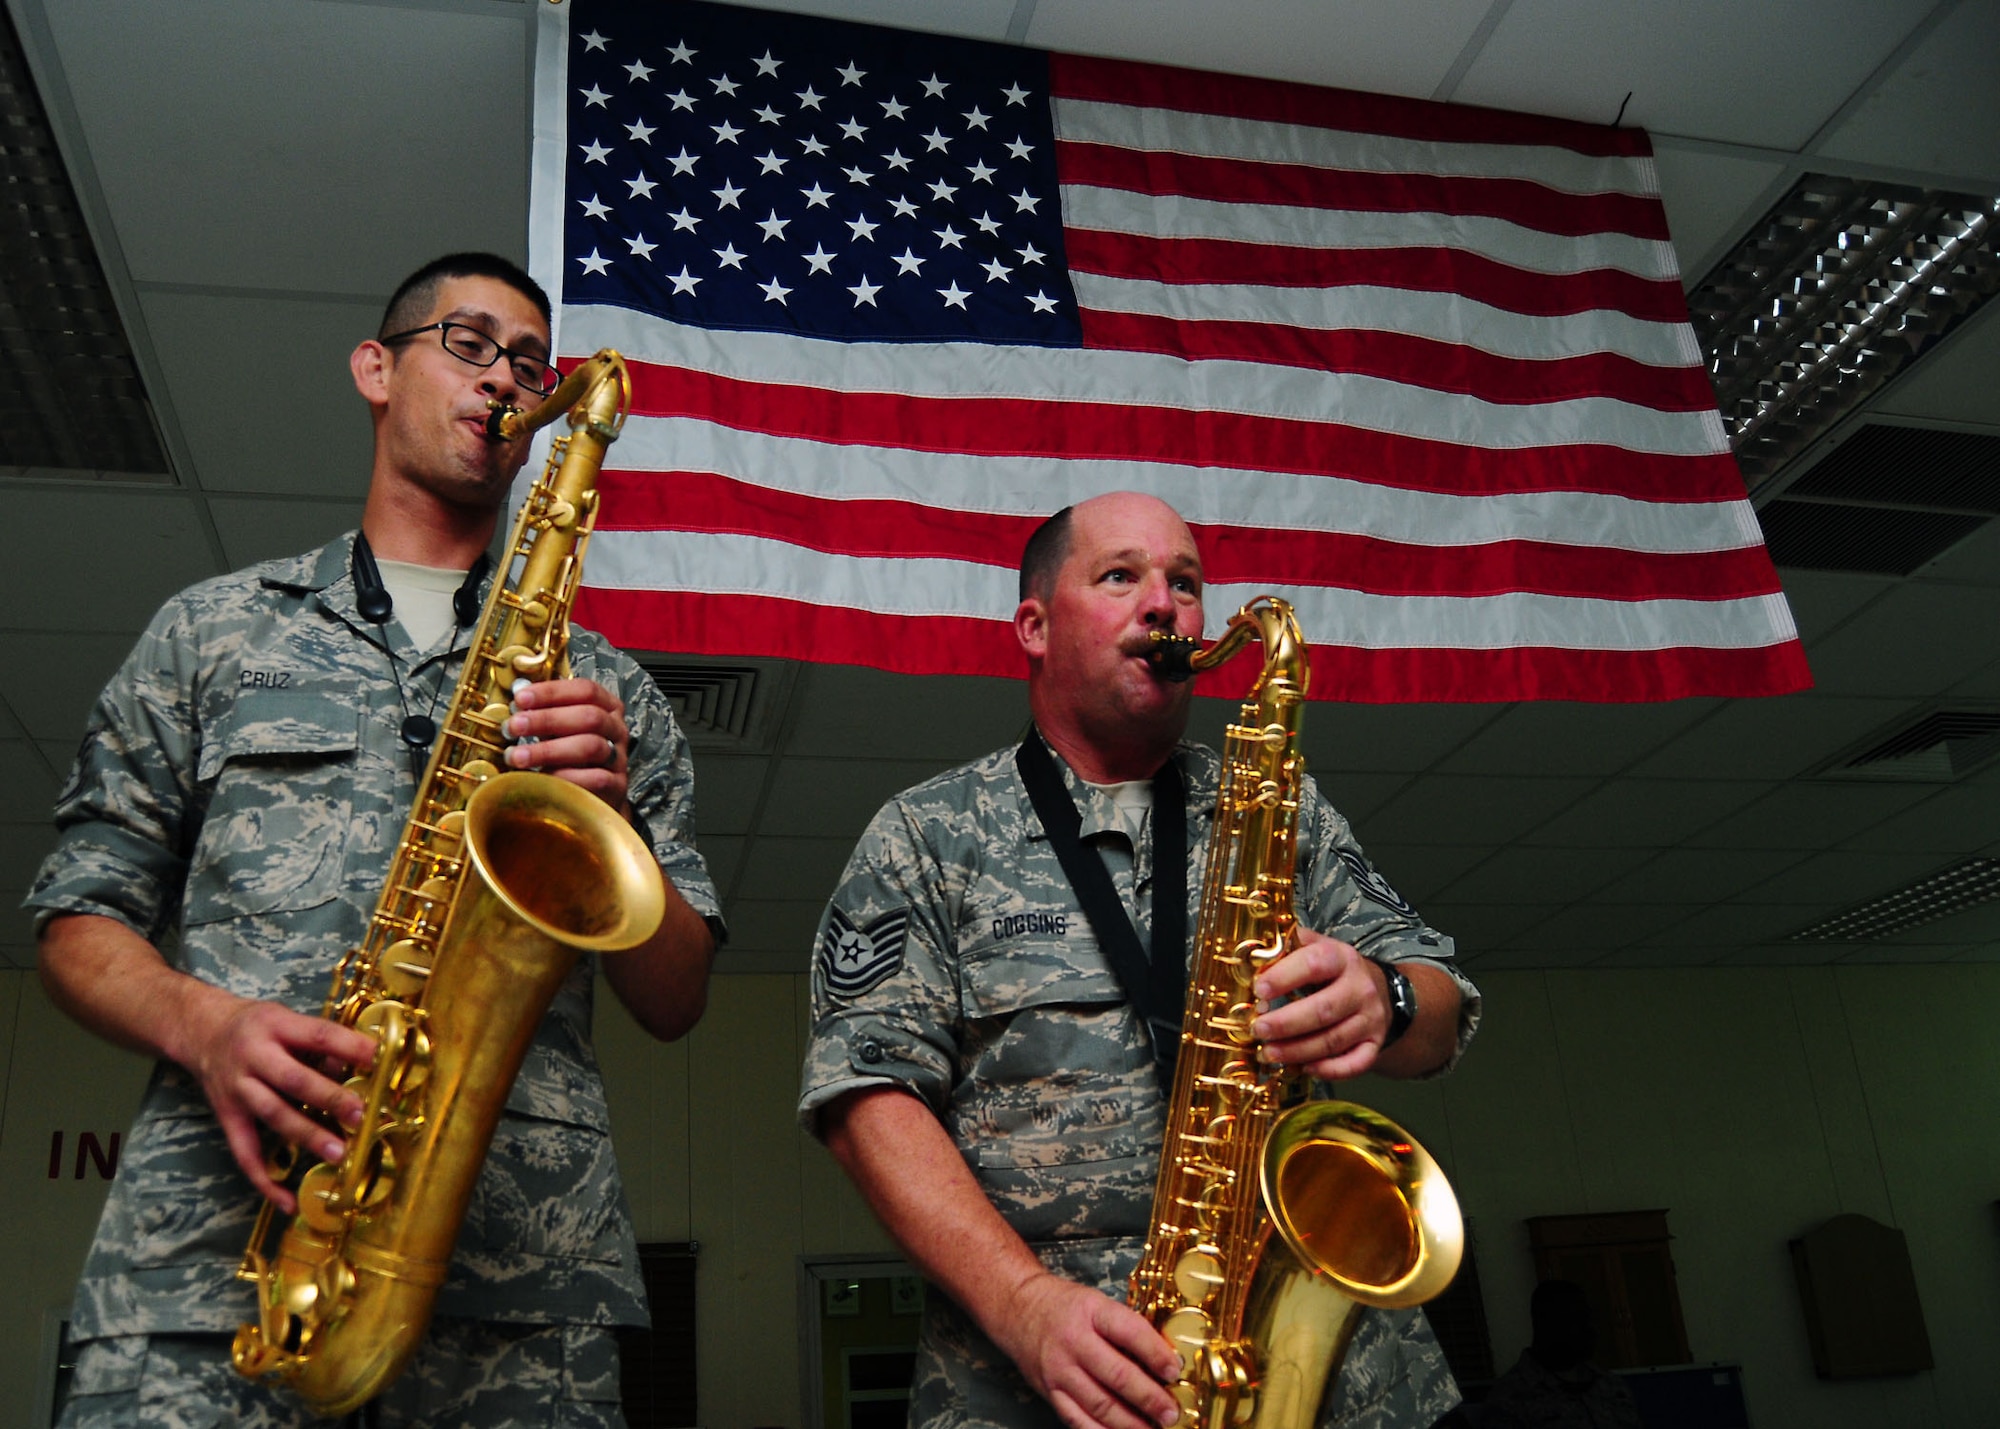 SOUTHWEST ASIA -- Staff Sgt. Jorge Cruz, left, and Brian Coggins, from the Air Force Central Command Sonora band, play saxaphone under the stars and stripes at a performance for the 386th Air Expeditionary Wing July 21. Sergeants Cruz and Coggins are members of the 129th Rescue Wing, Moffet Federal Air Field, Calif. (U.S. Air Force photo/Tony Tolley)